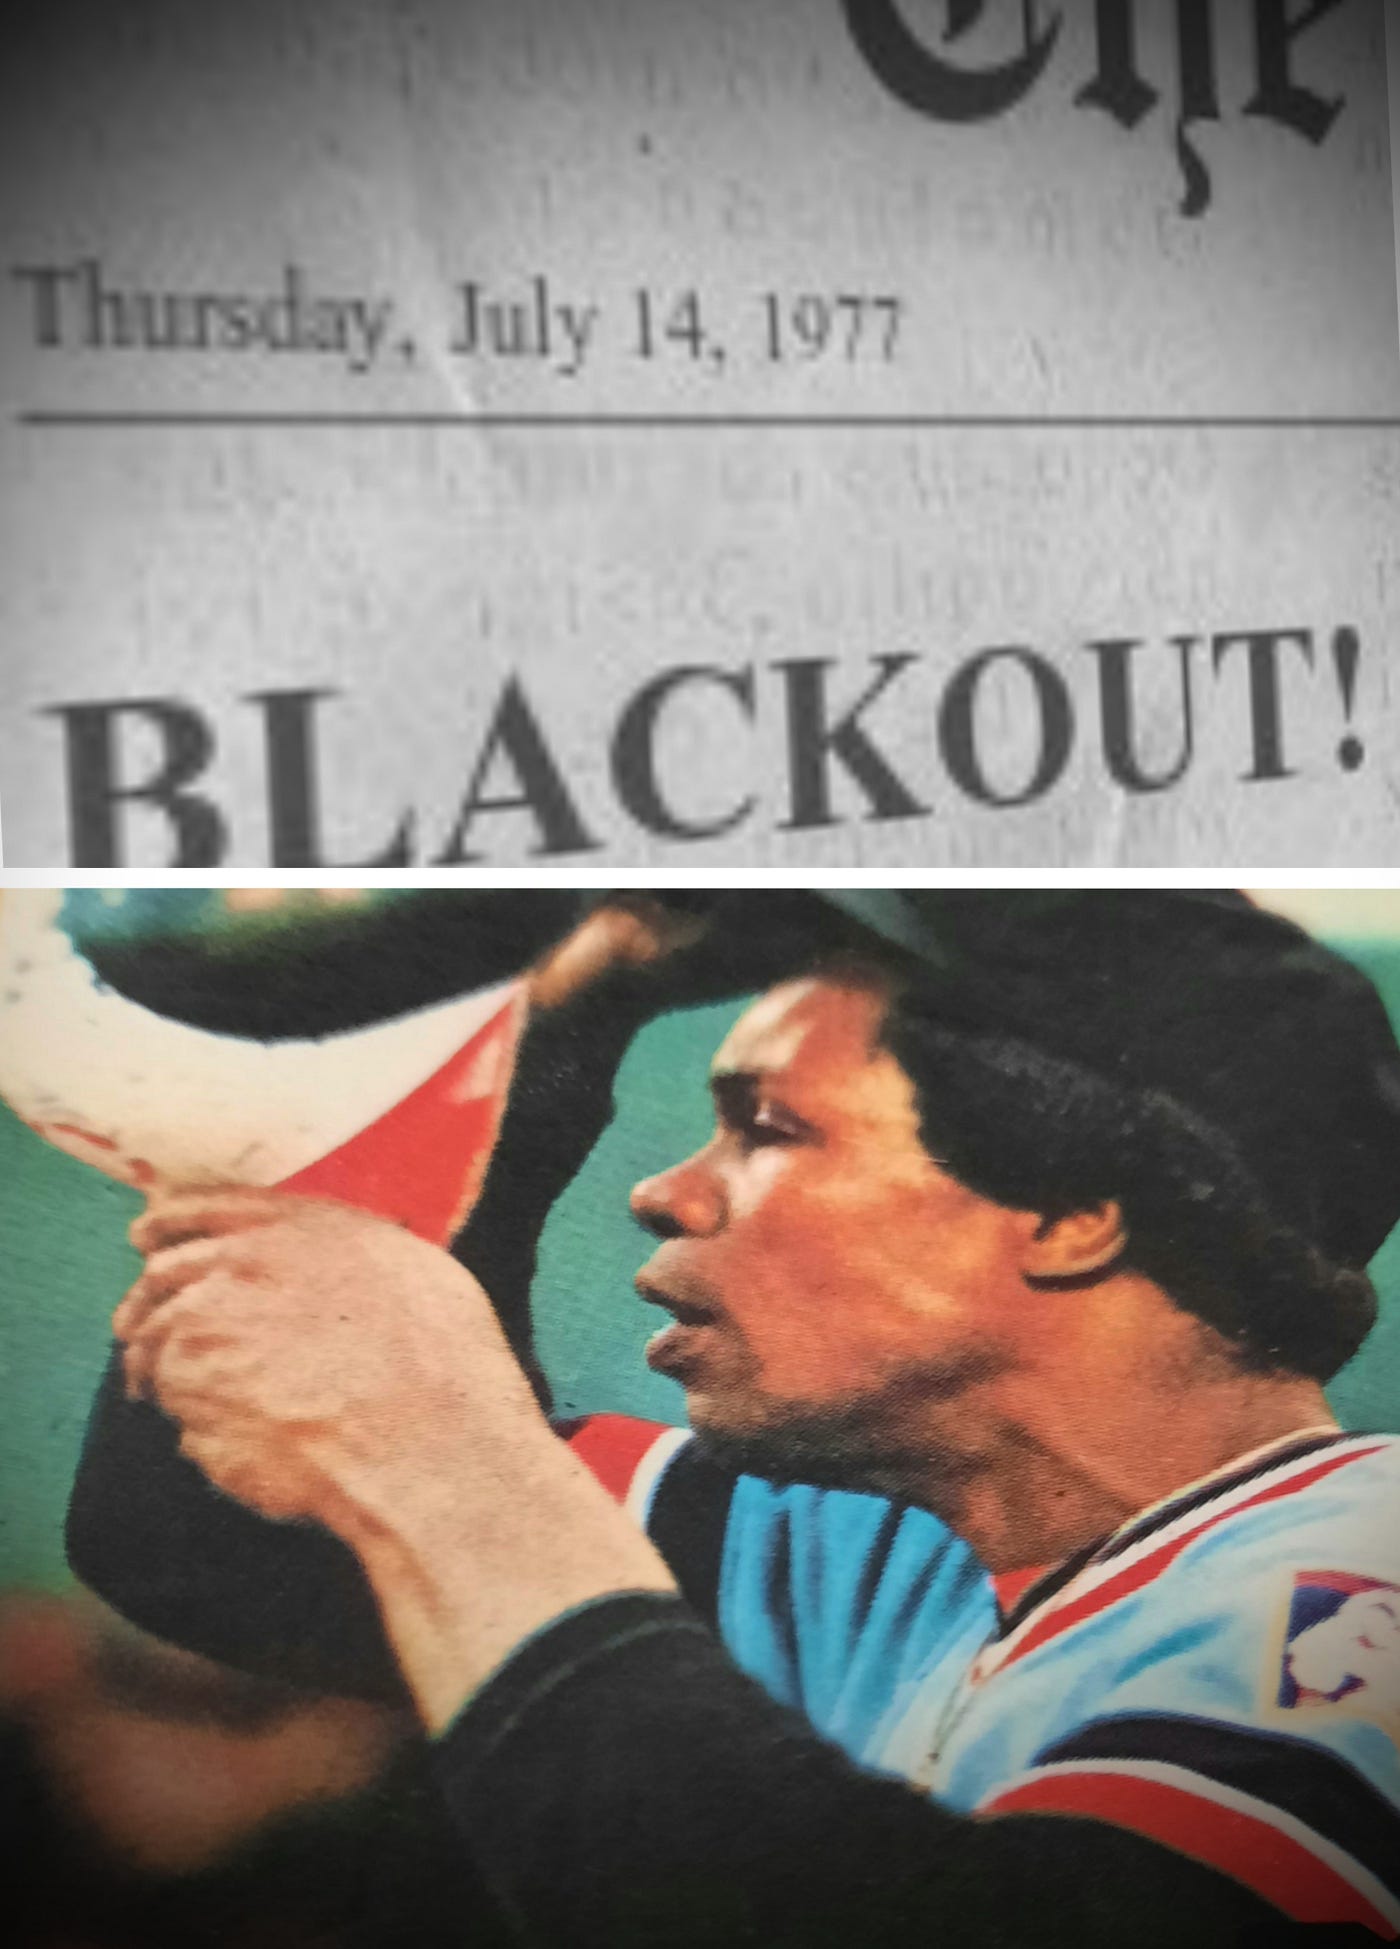 The Summer of 1977: Rod Carew and a Big Apple Blackout